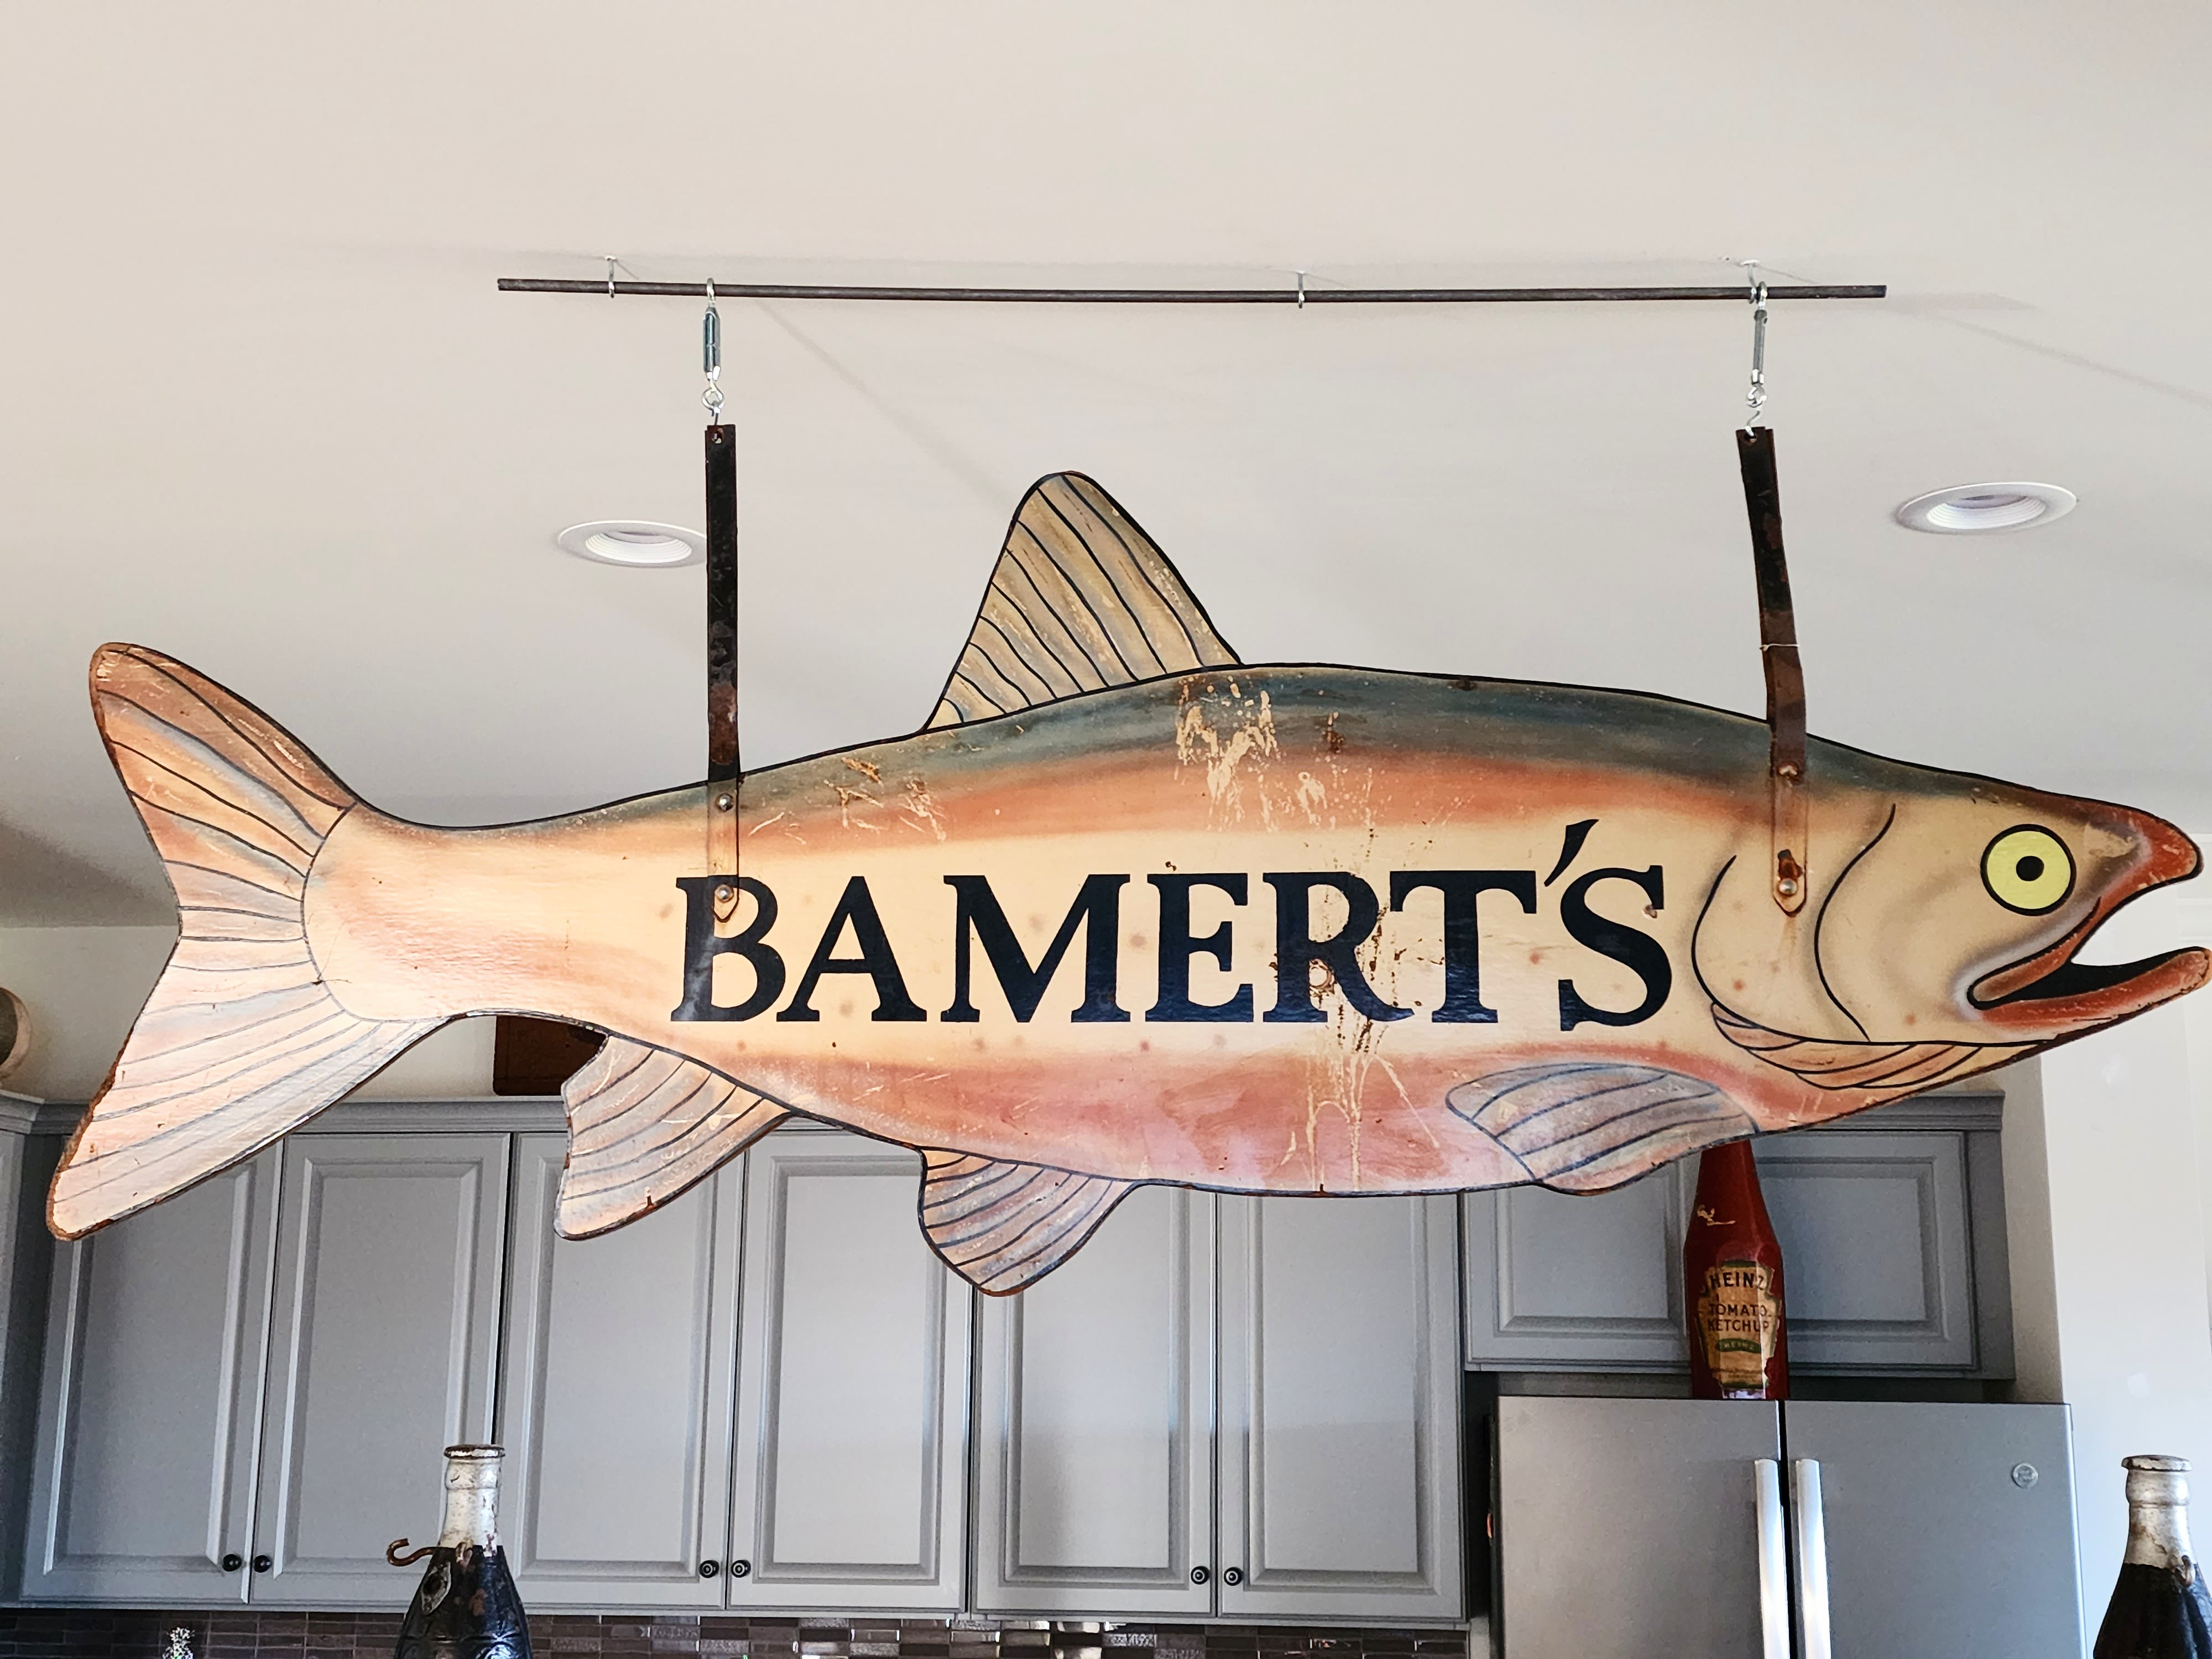 LARGE TRADE SIGN IN THE FORM OF A FISH